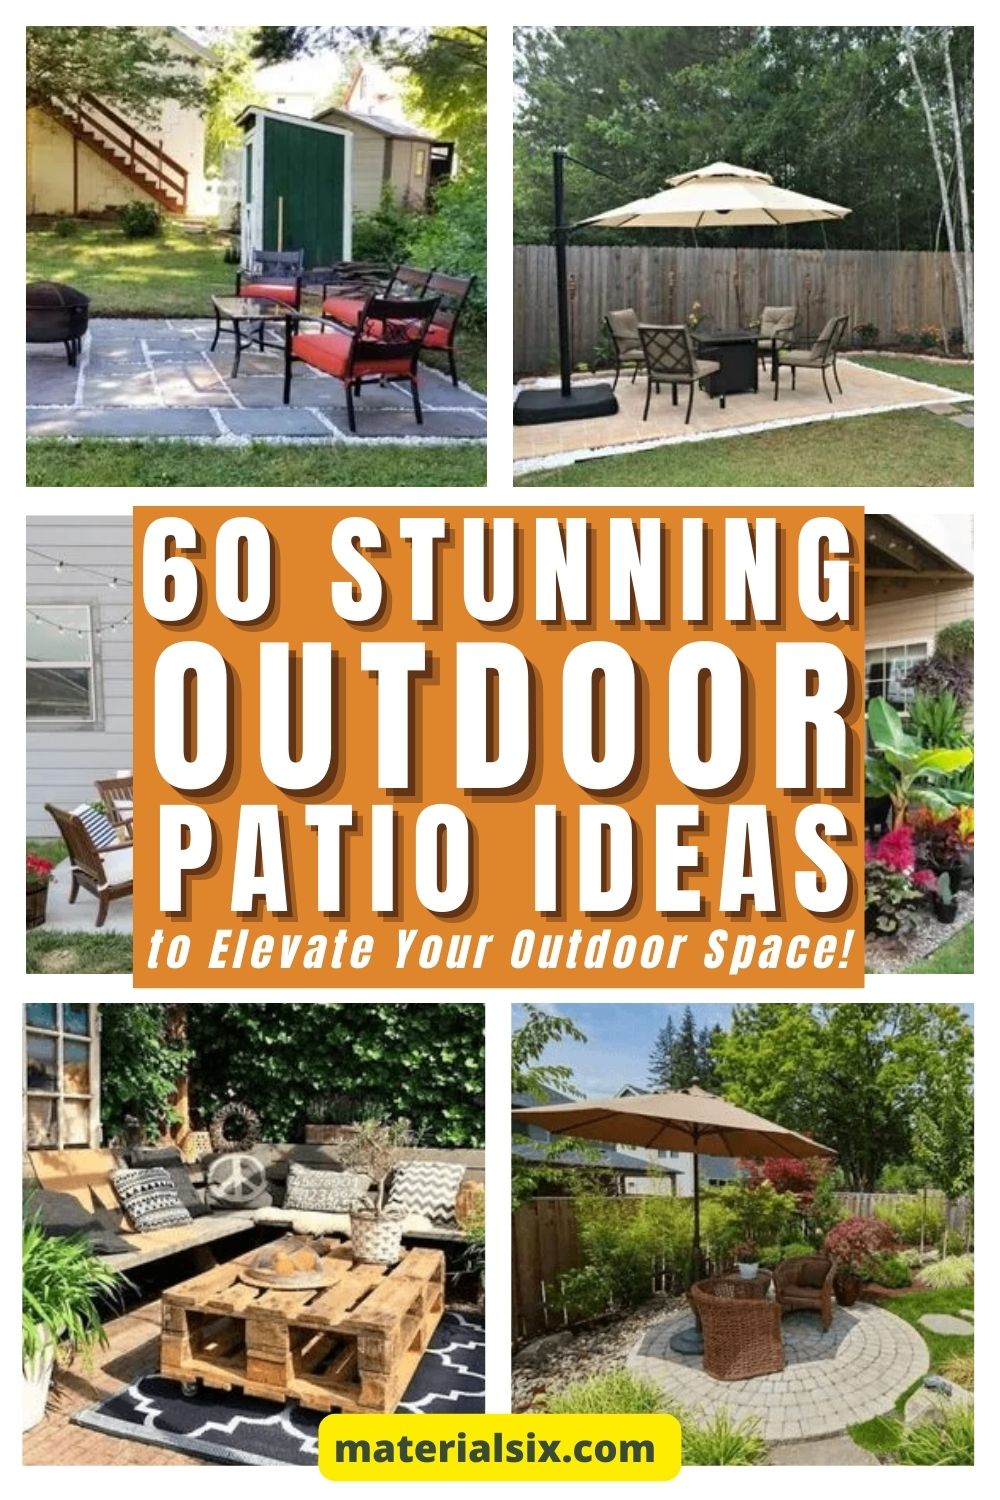 60 Stunning Patio Designs to Elevate Your Outdoor Space!